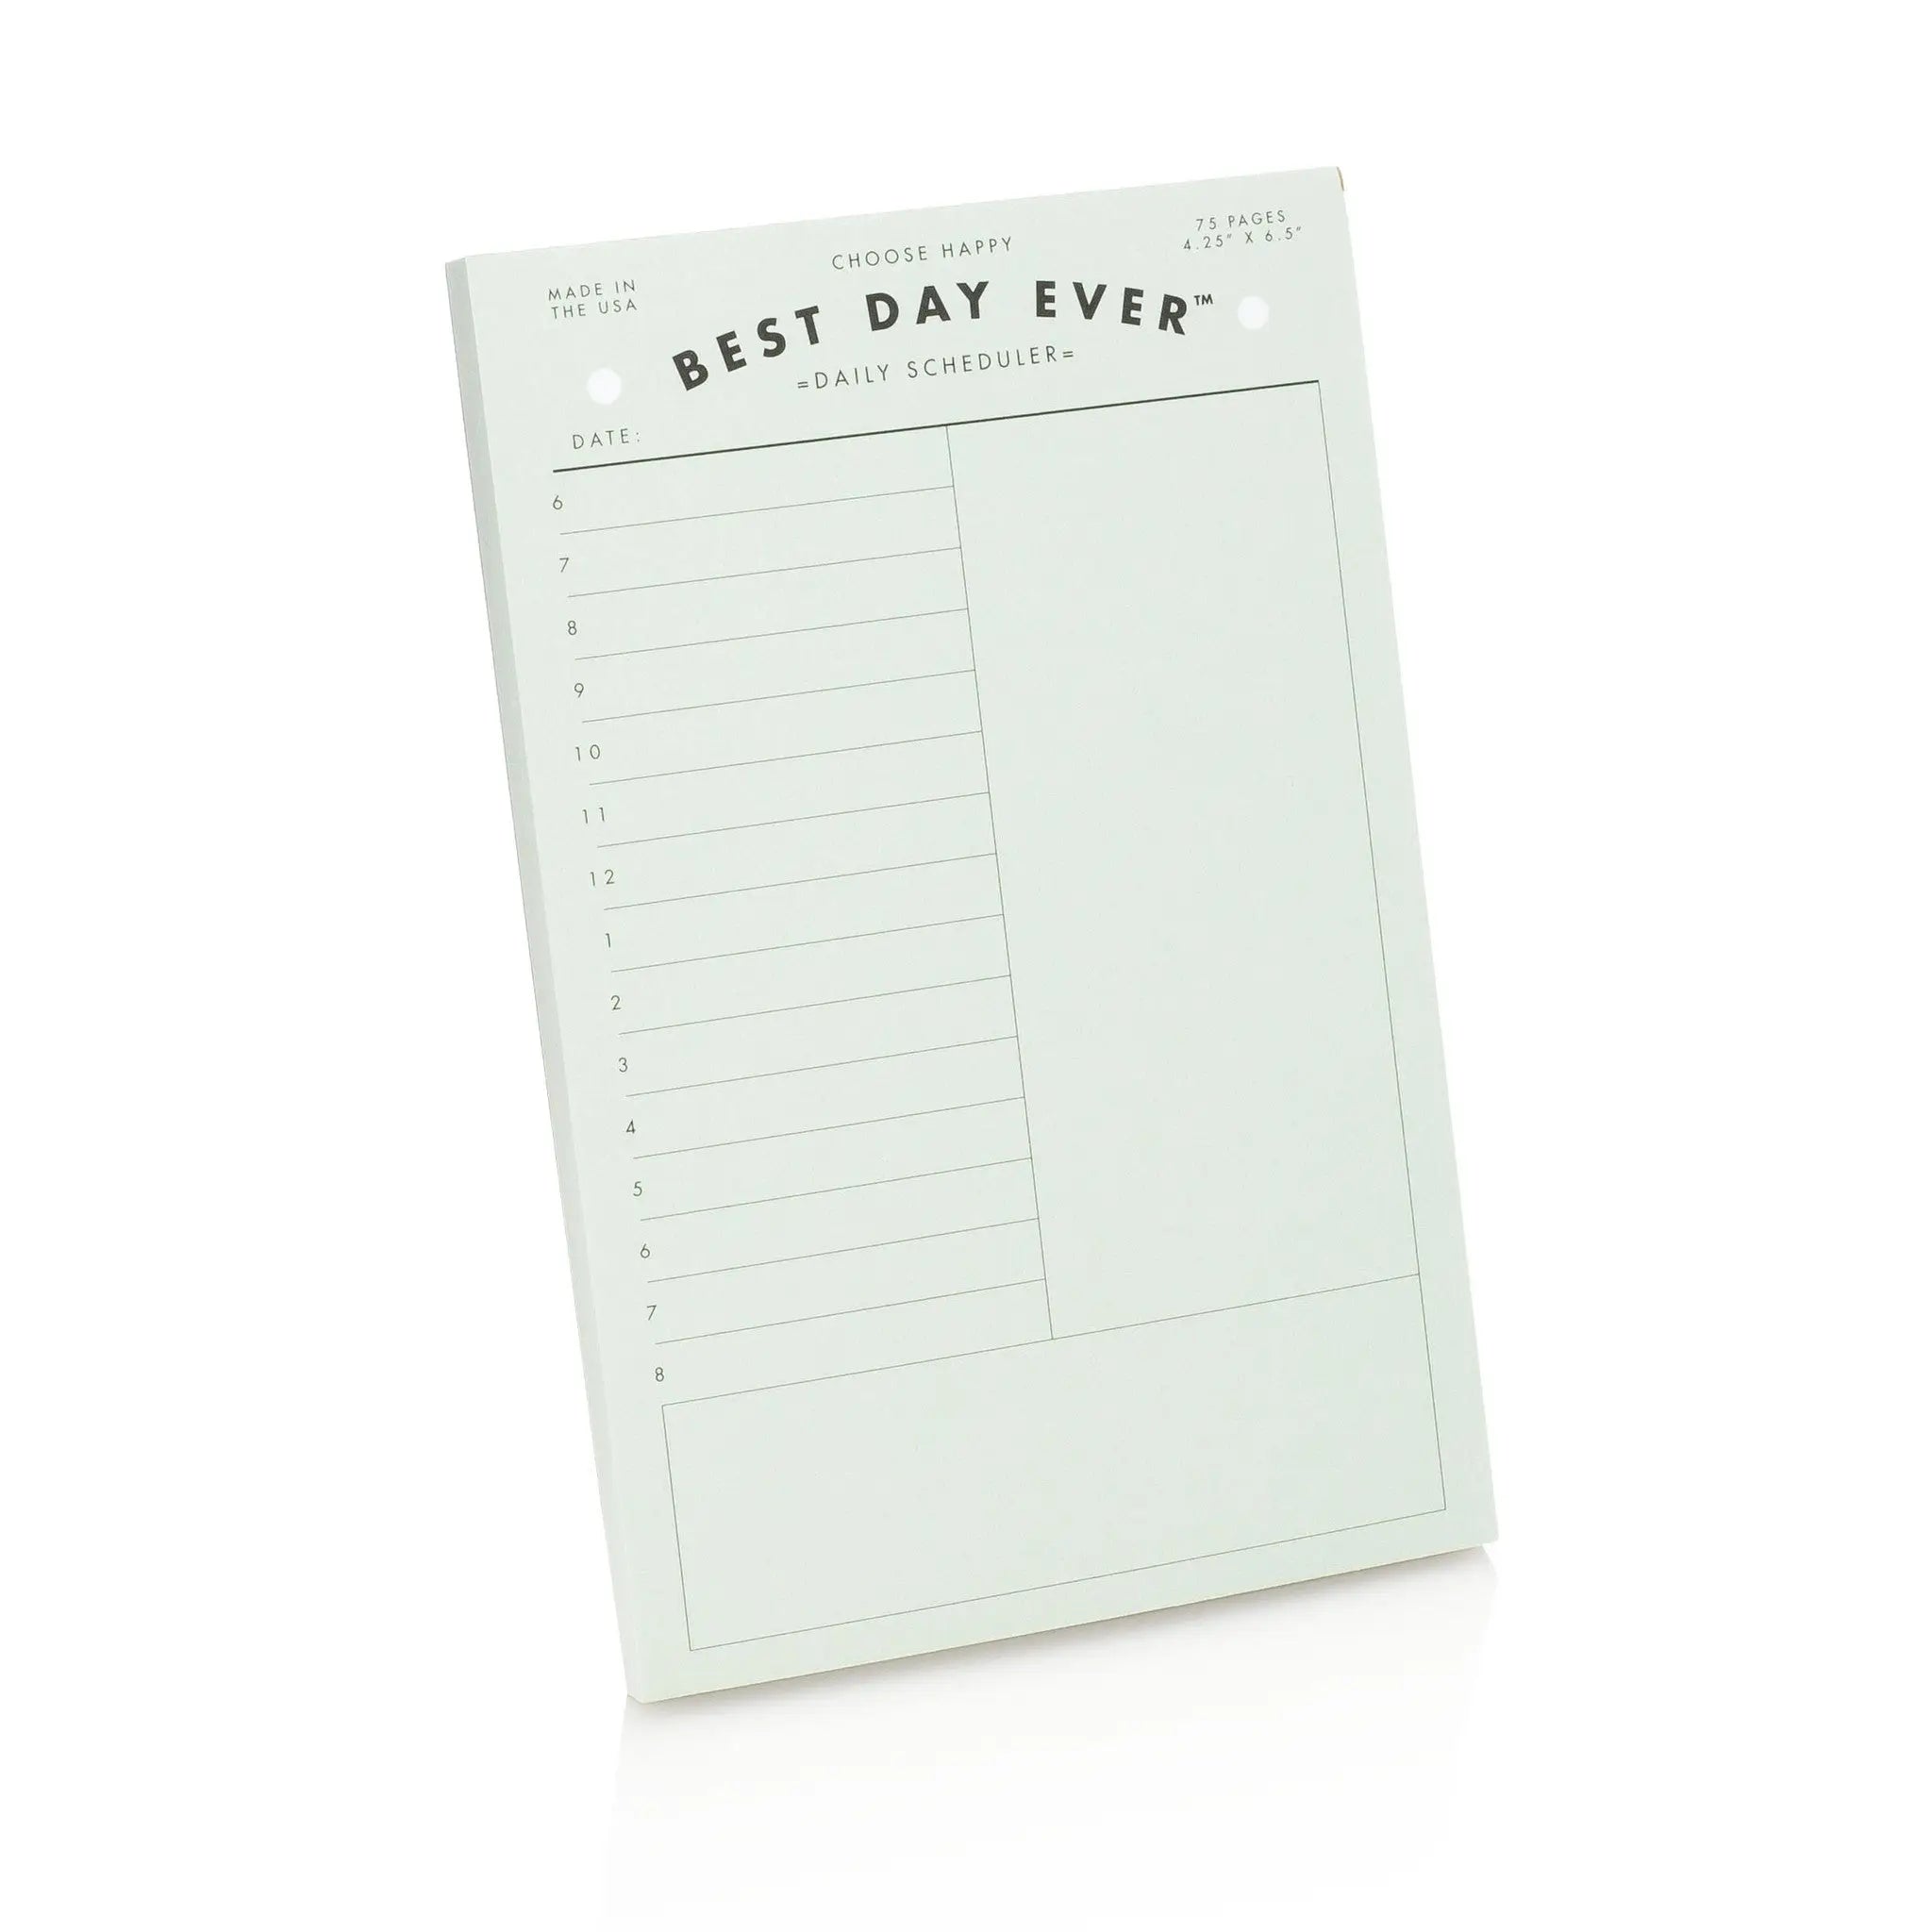 Best Day Ever Stationery Products